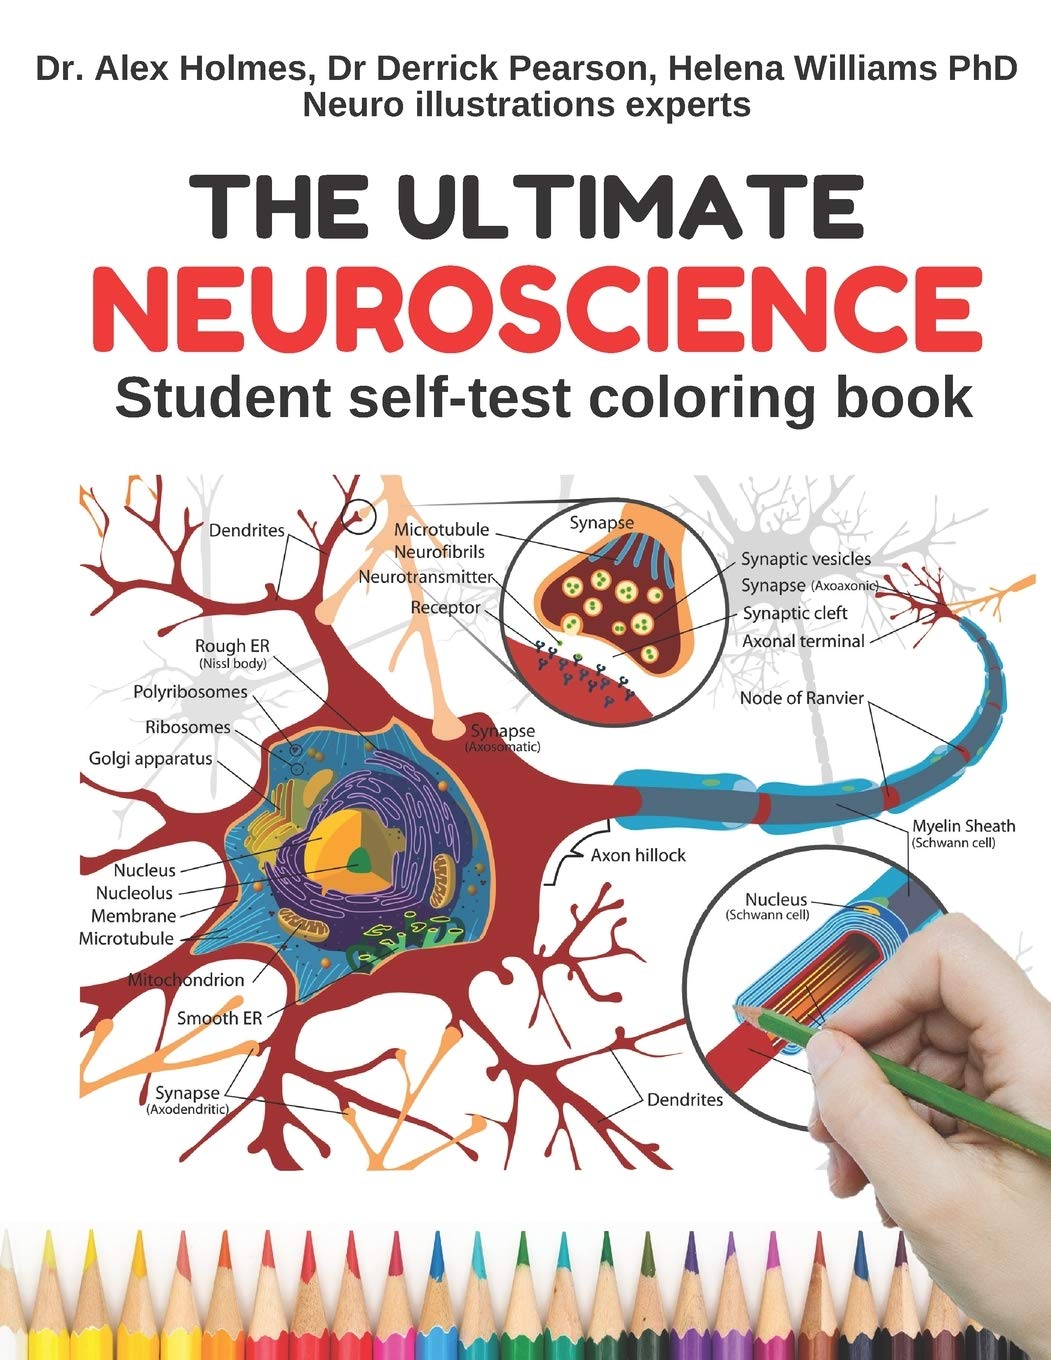 The ultimate neuroscience student self test coloring book easy fun and smart way to learn revise and remember neuroanatomy perfect gift of medical and even kids by alex holmes